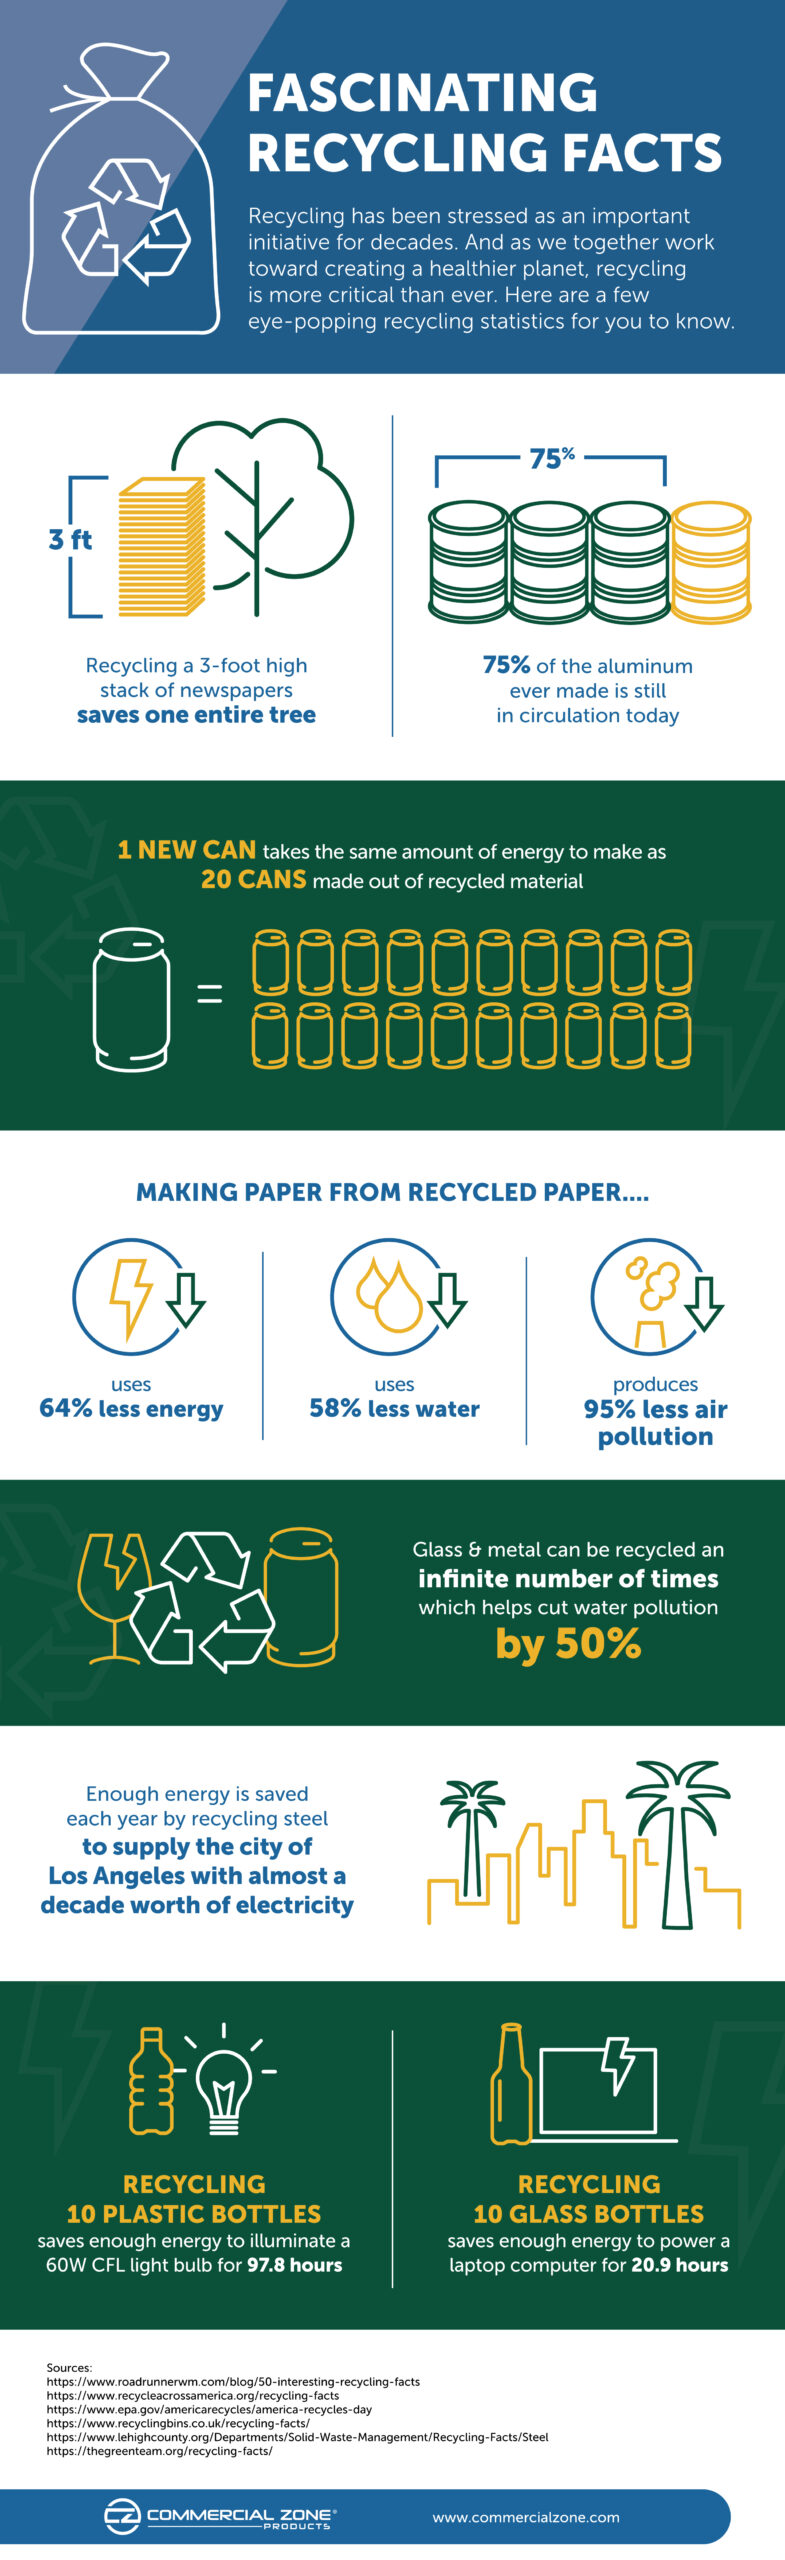 America Recycles Day 2017 | Reduce, Reuse, Recycle | US EPA